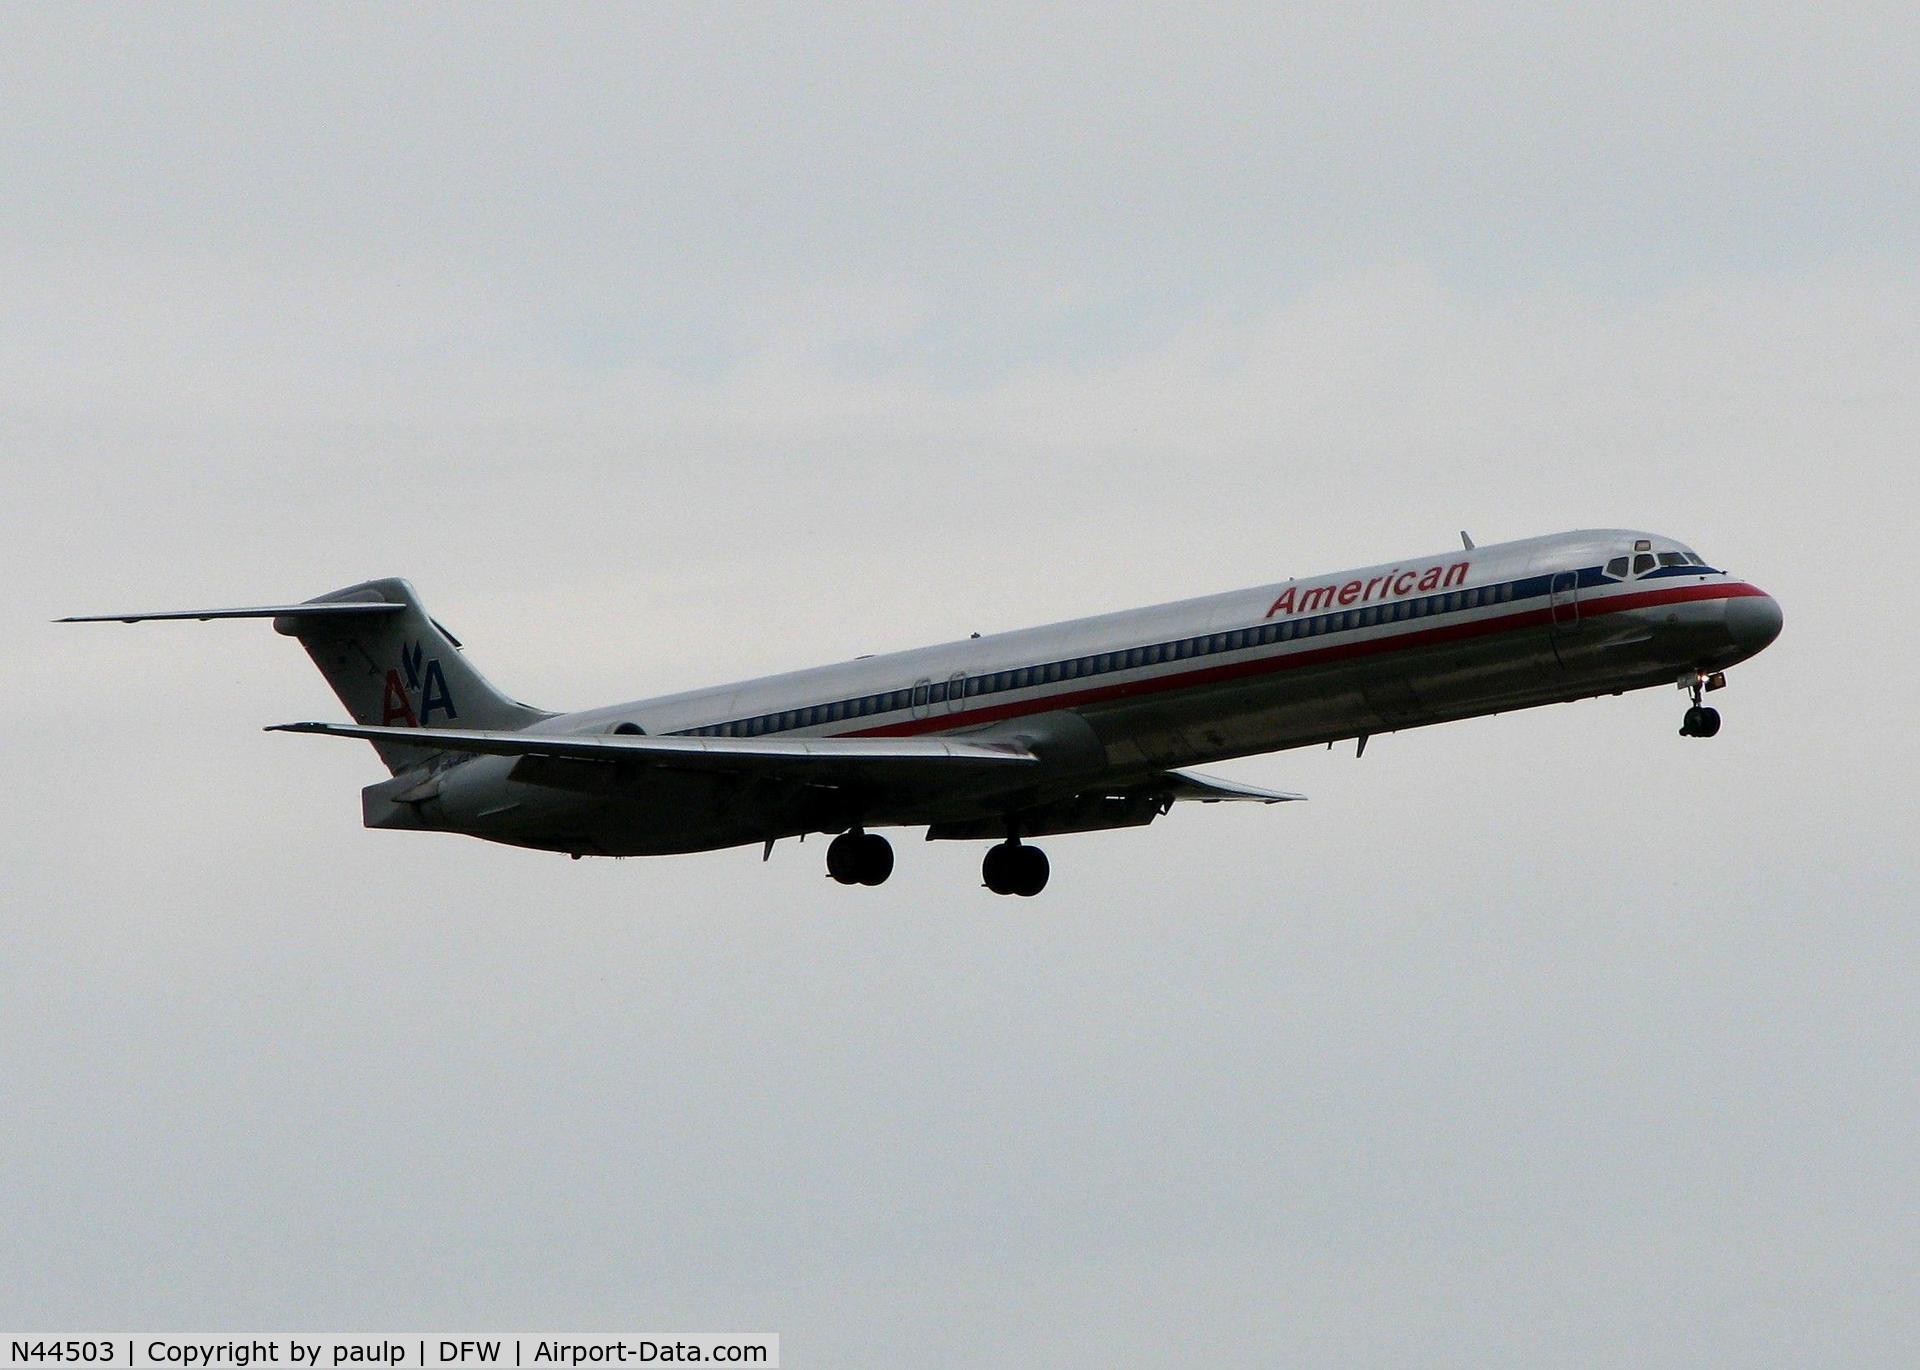 N44503, 1989 McDonnell Douglas MD-82 (DC-9-82) C/N 49797, Landing at DFW. A nasty, rainy day for photos?